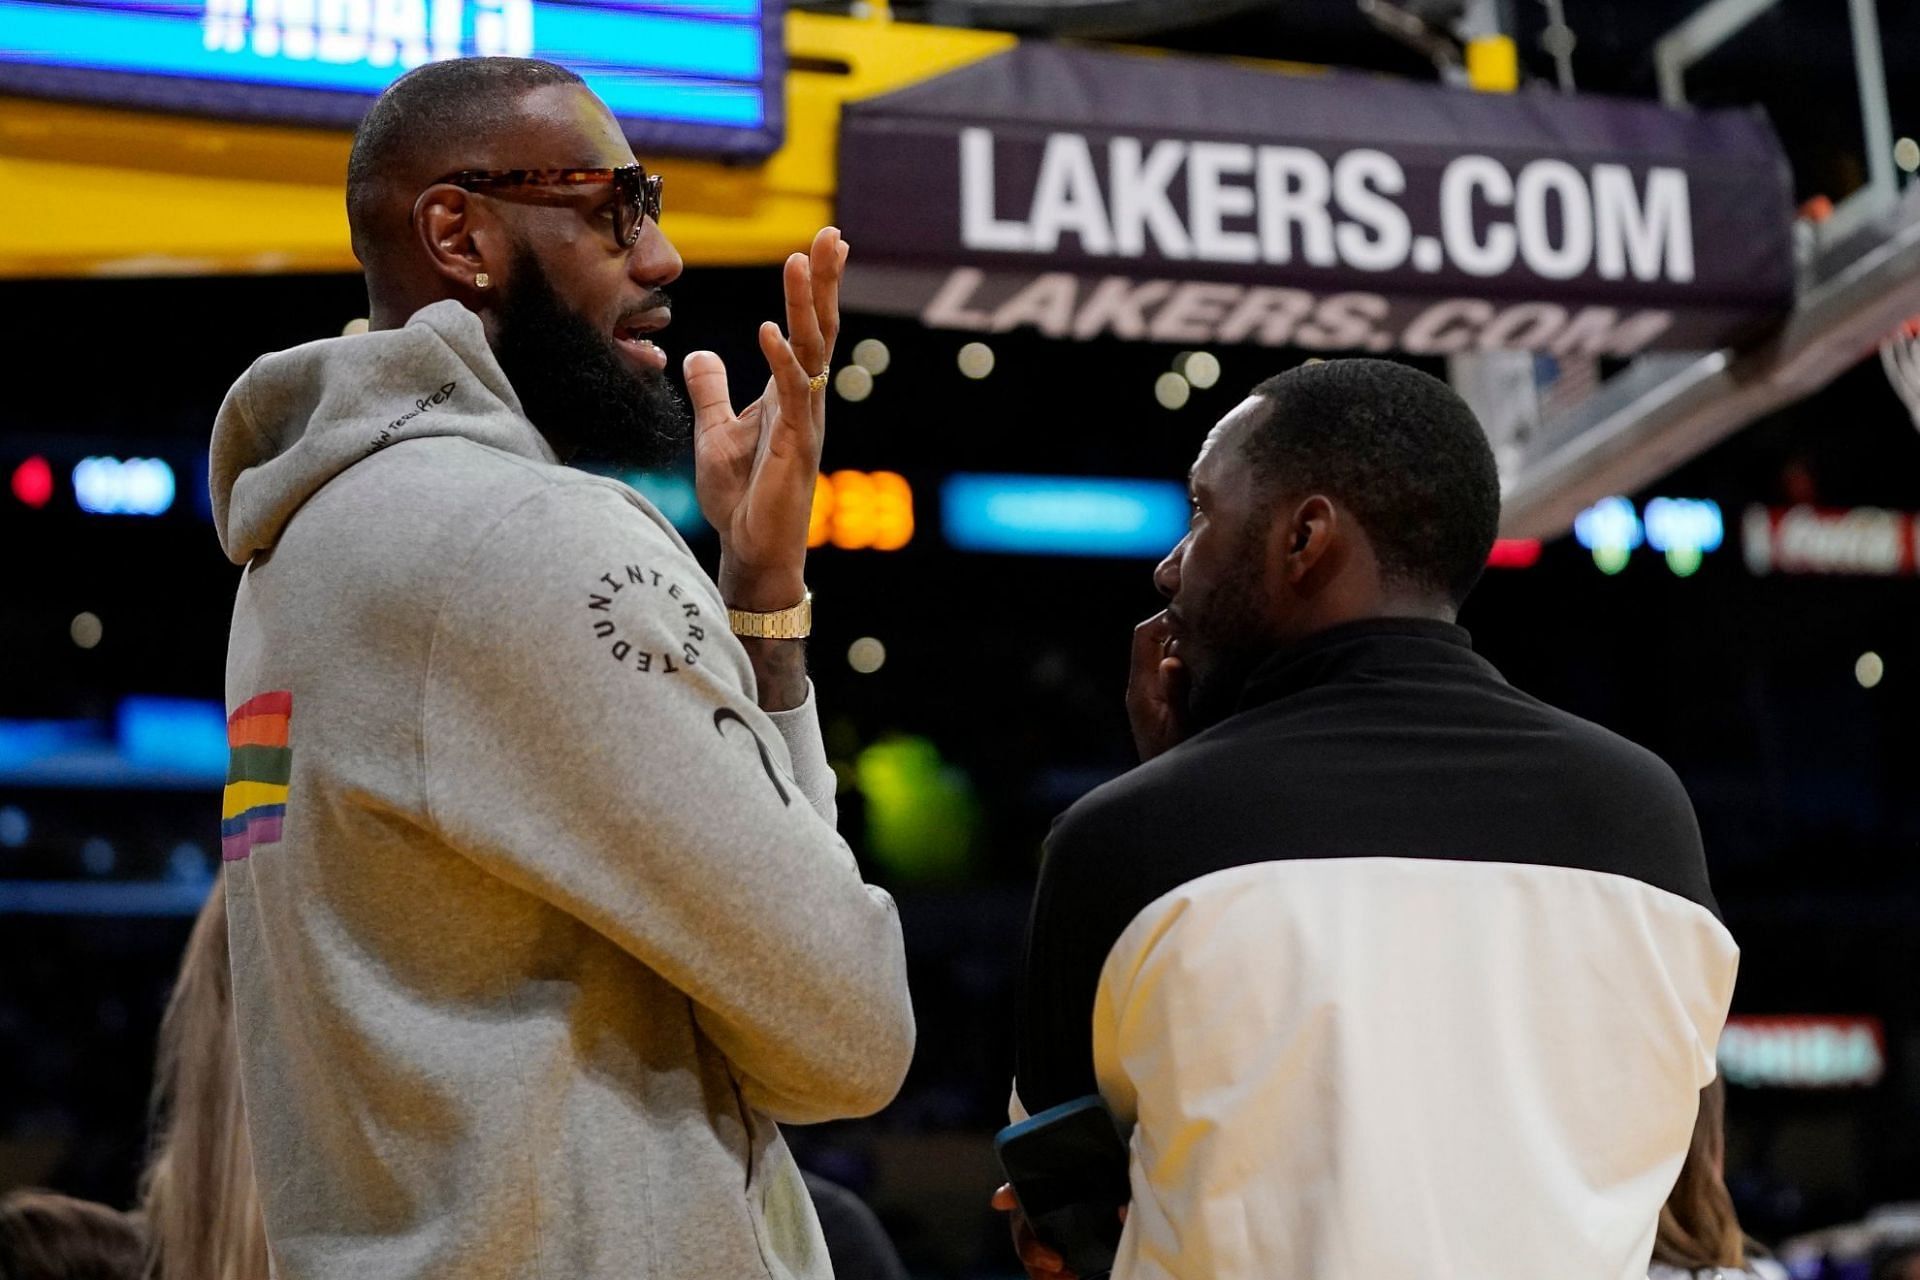 LA Lakers star forward LeBron James and his agent Rich Paul